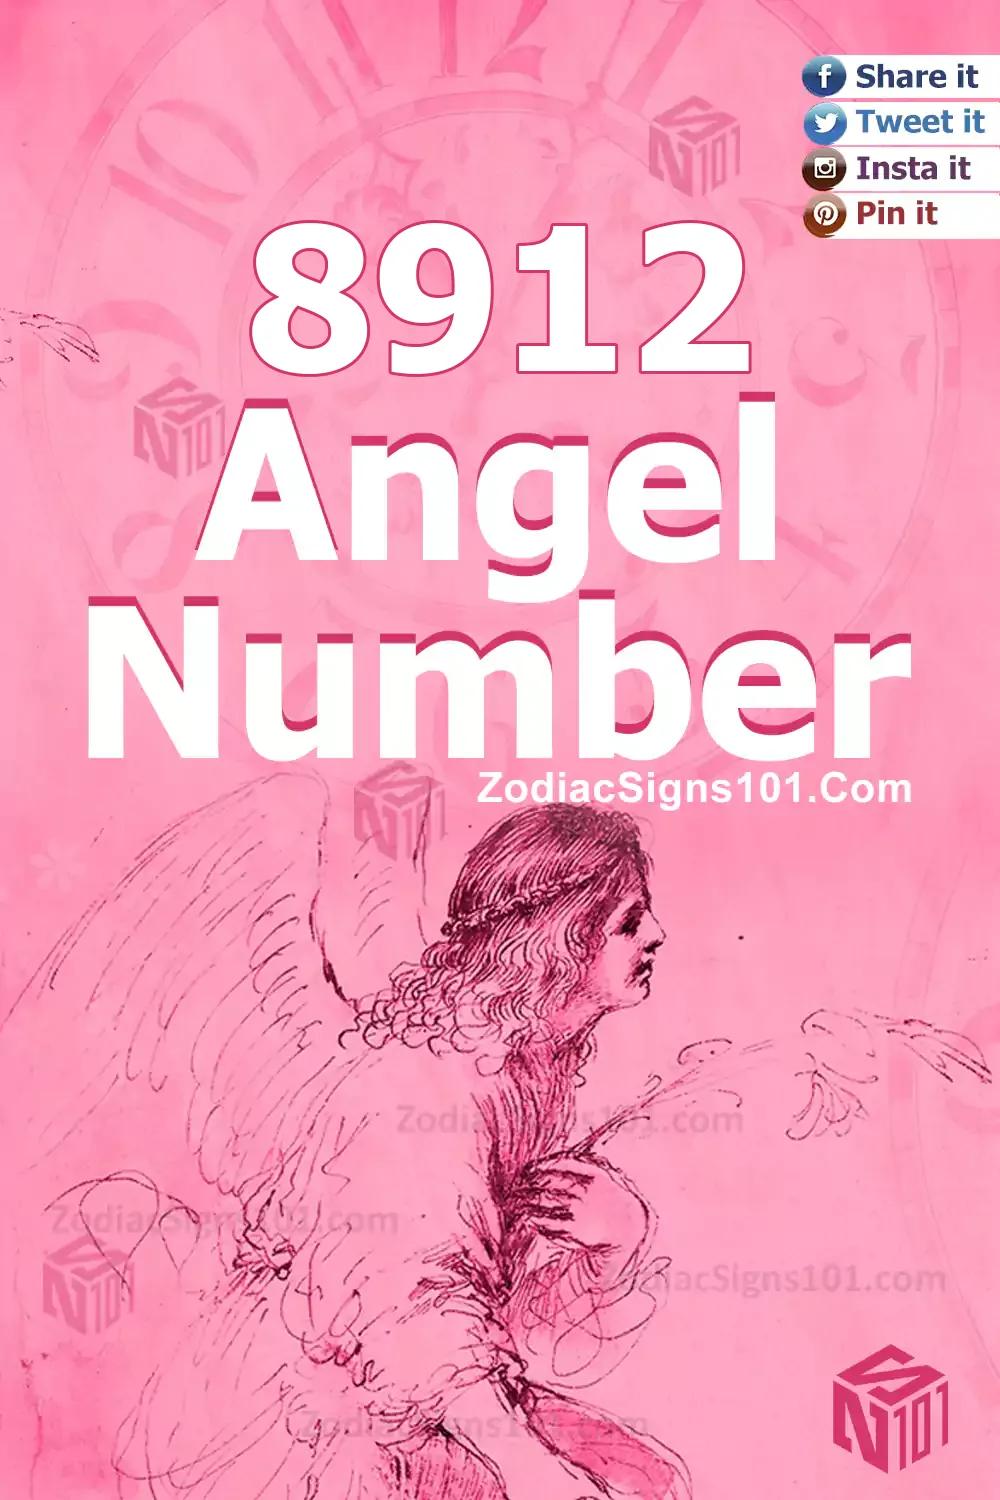 8912 Angel Number Meaning